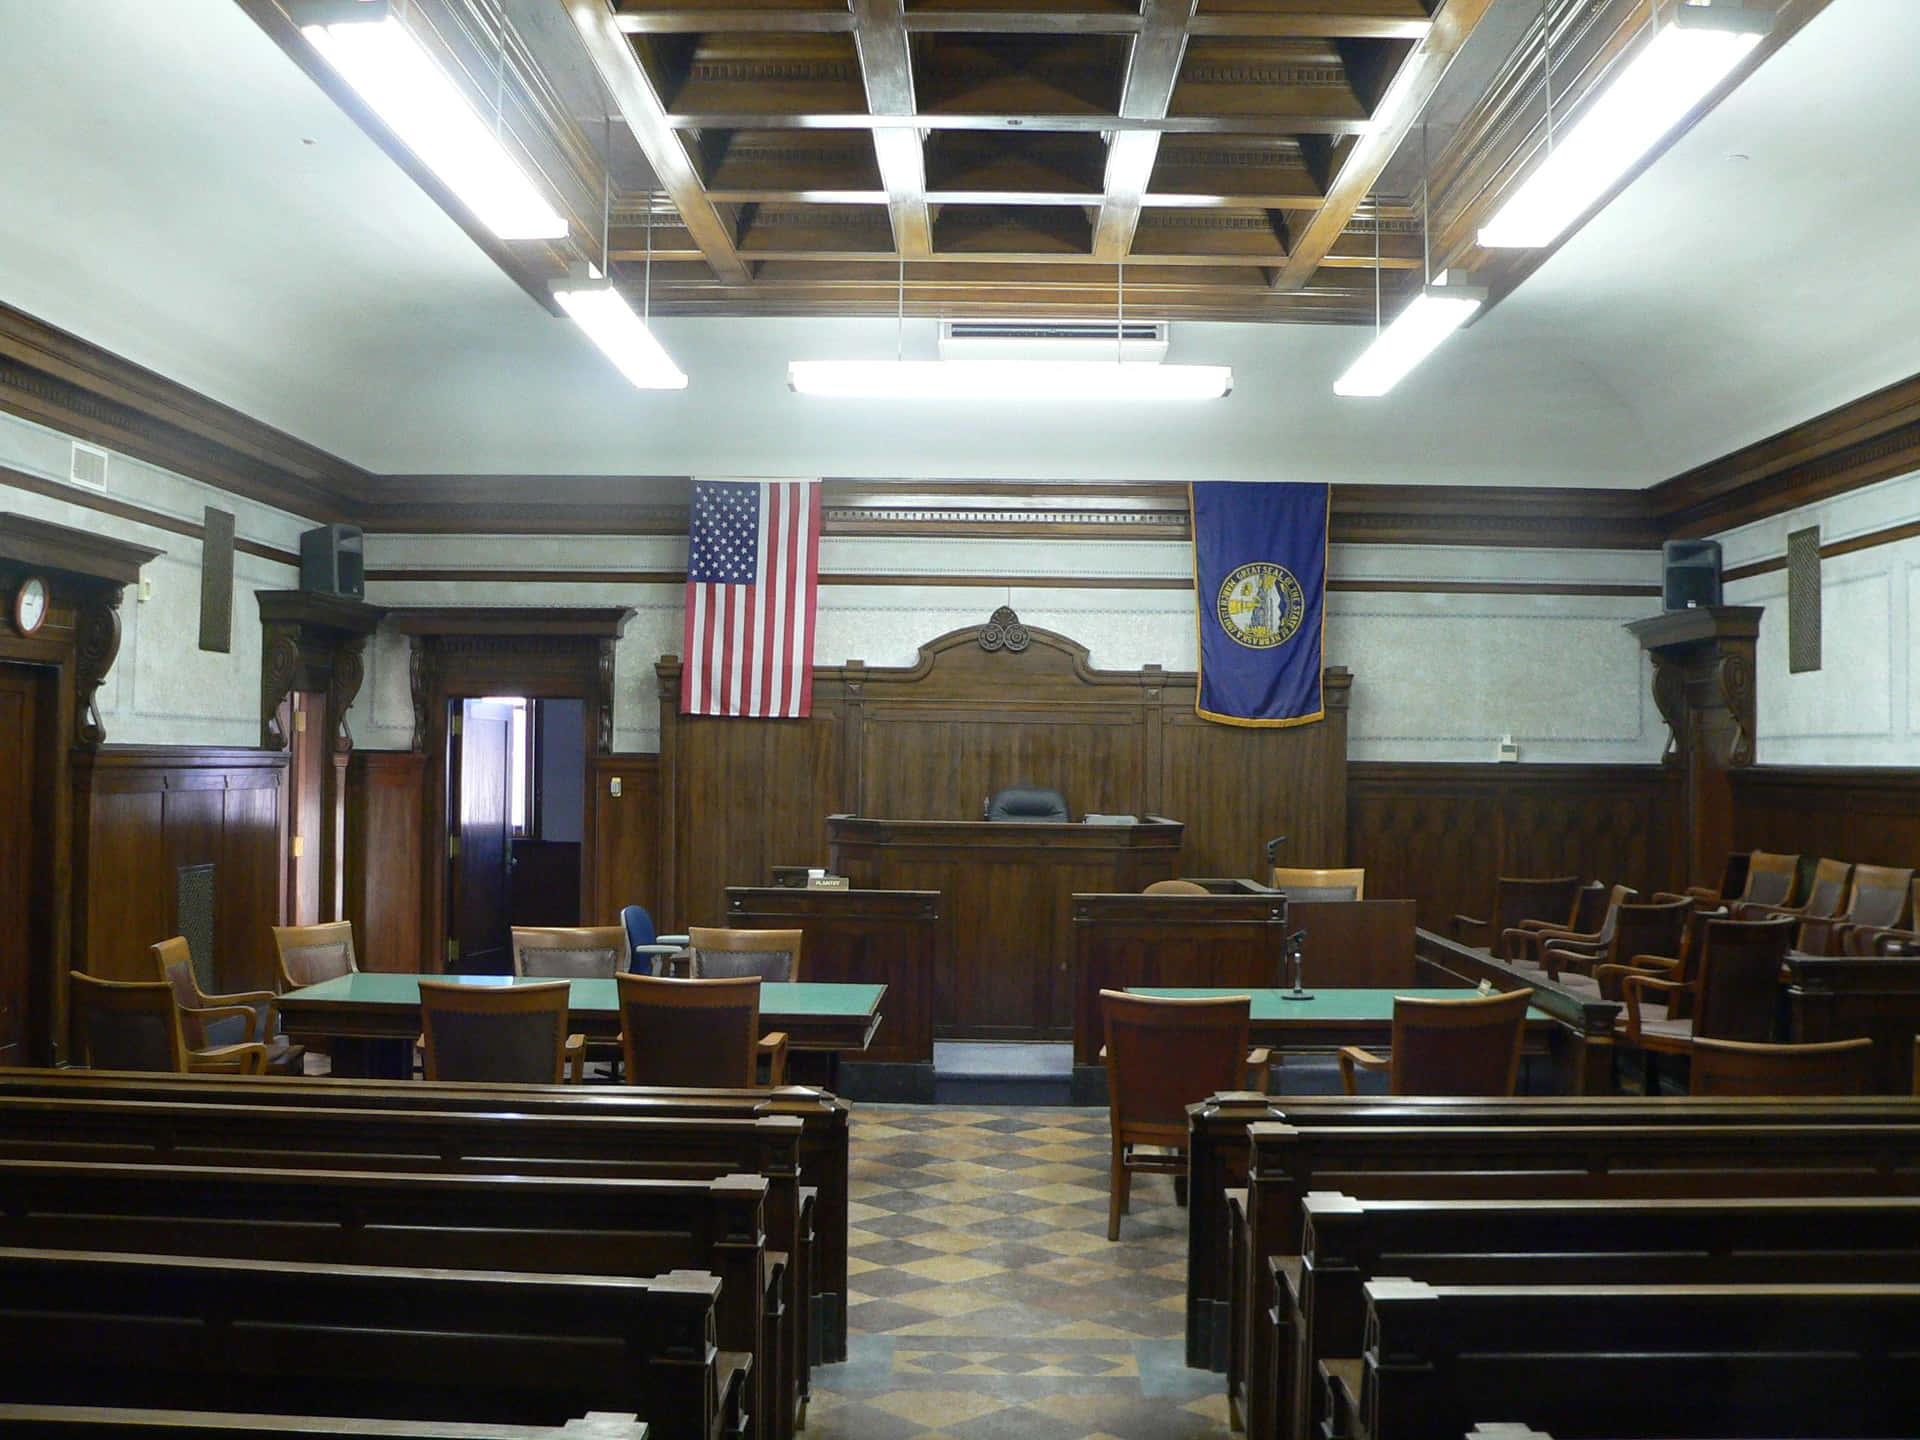 Justice being served in courtroom